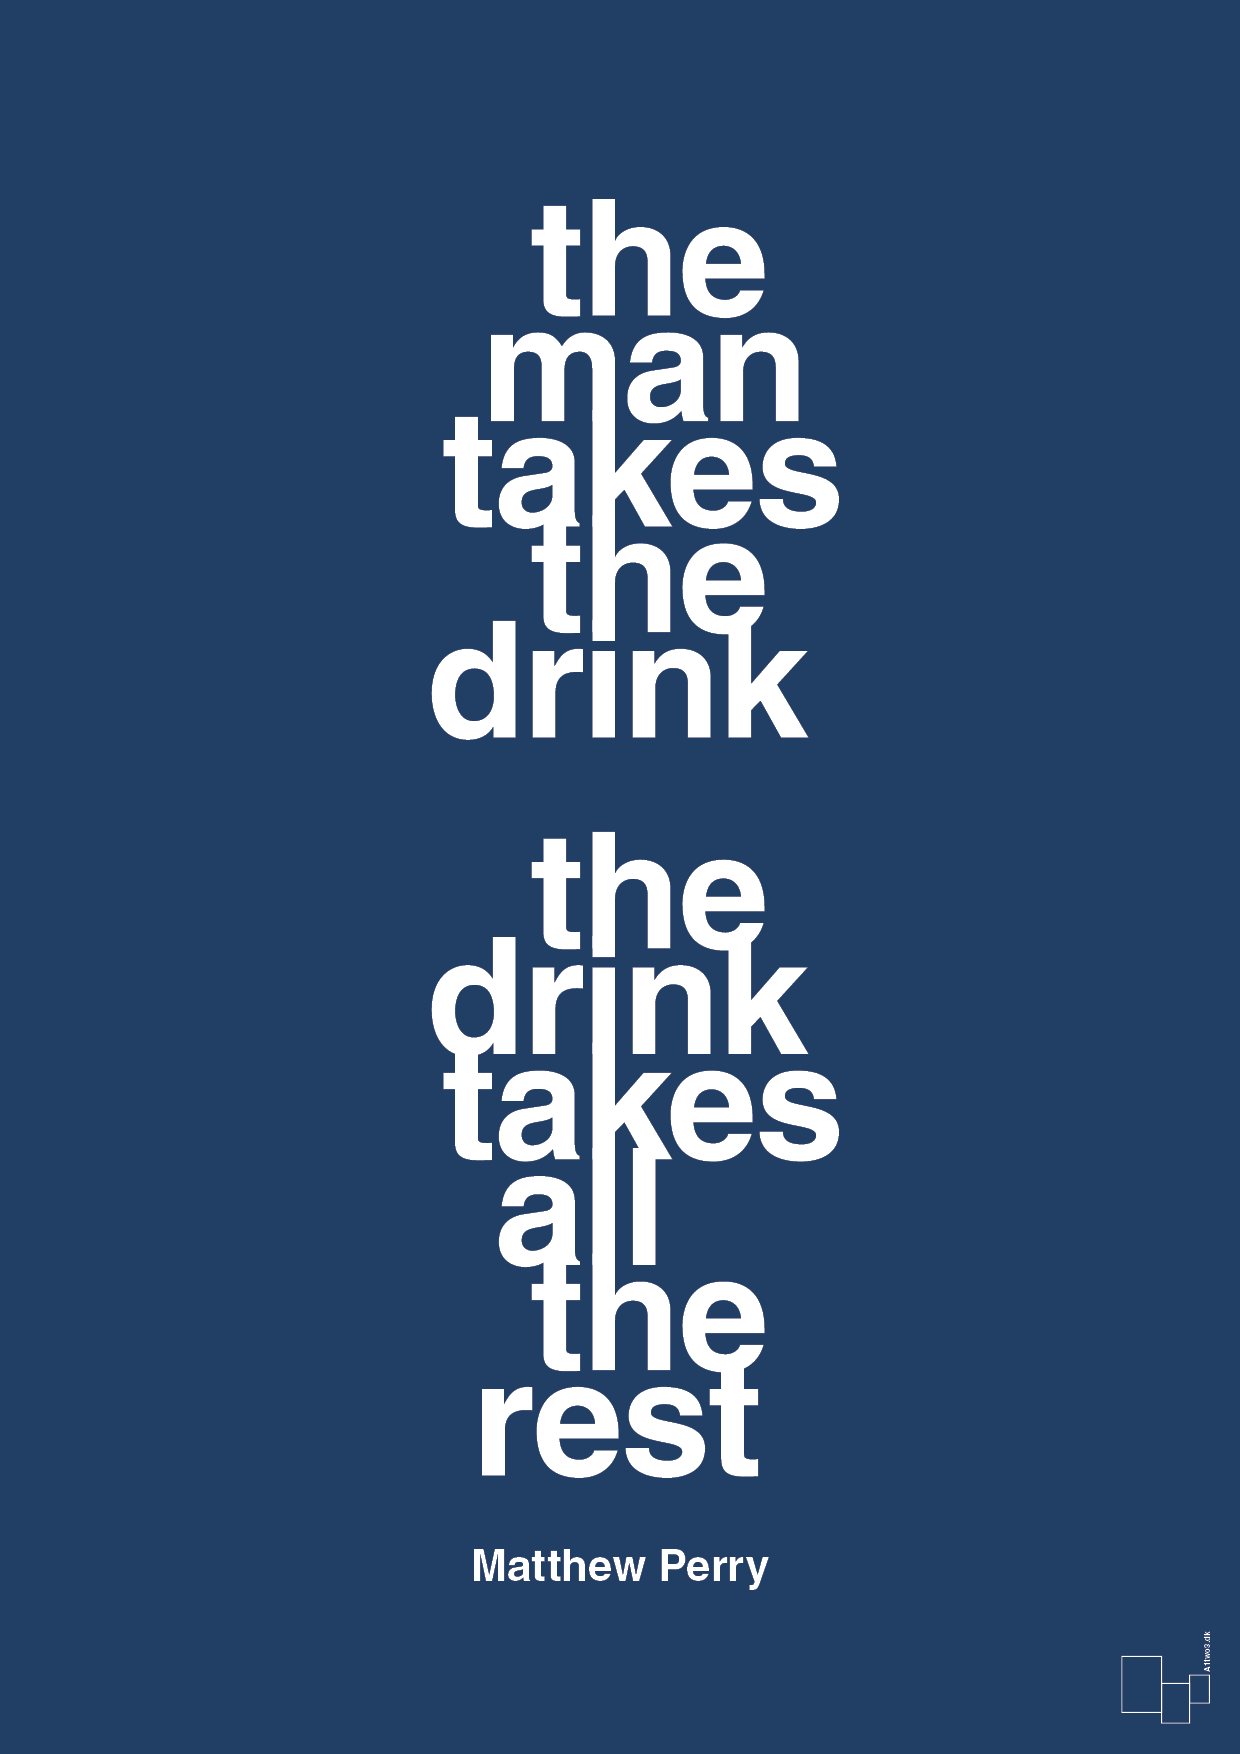 the man takes the drink the drink takes all the rest - Plakat med Citater i Lapis Blue